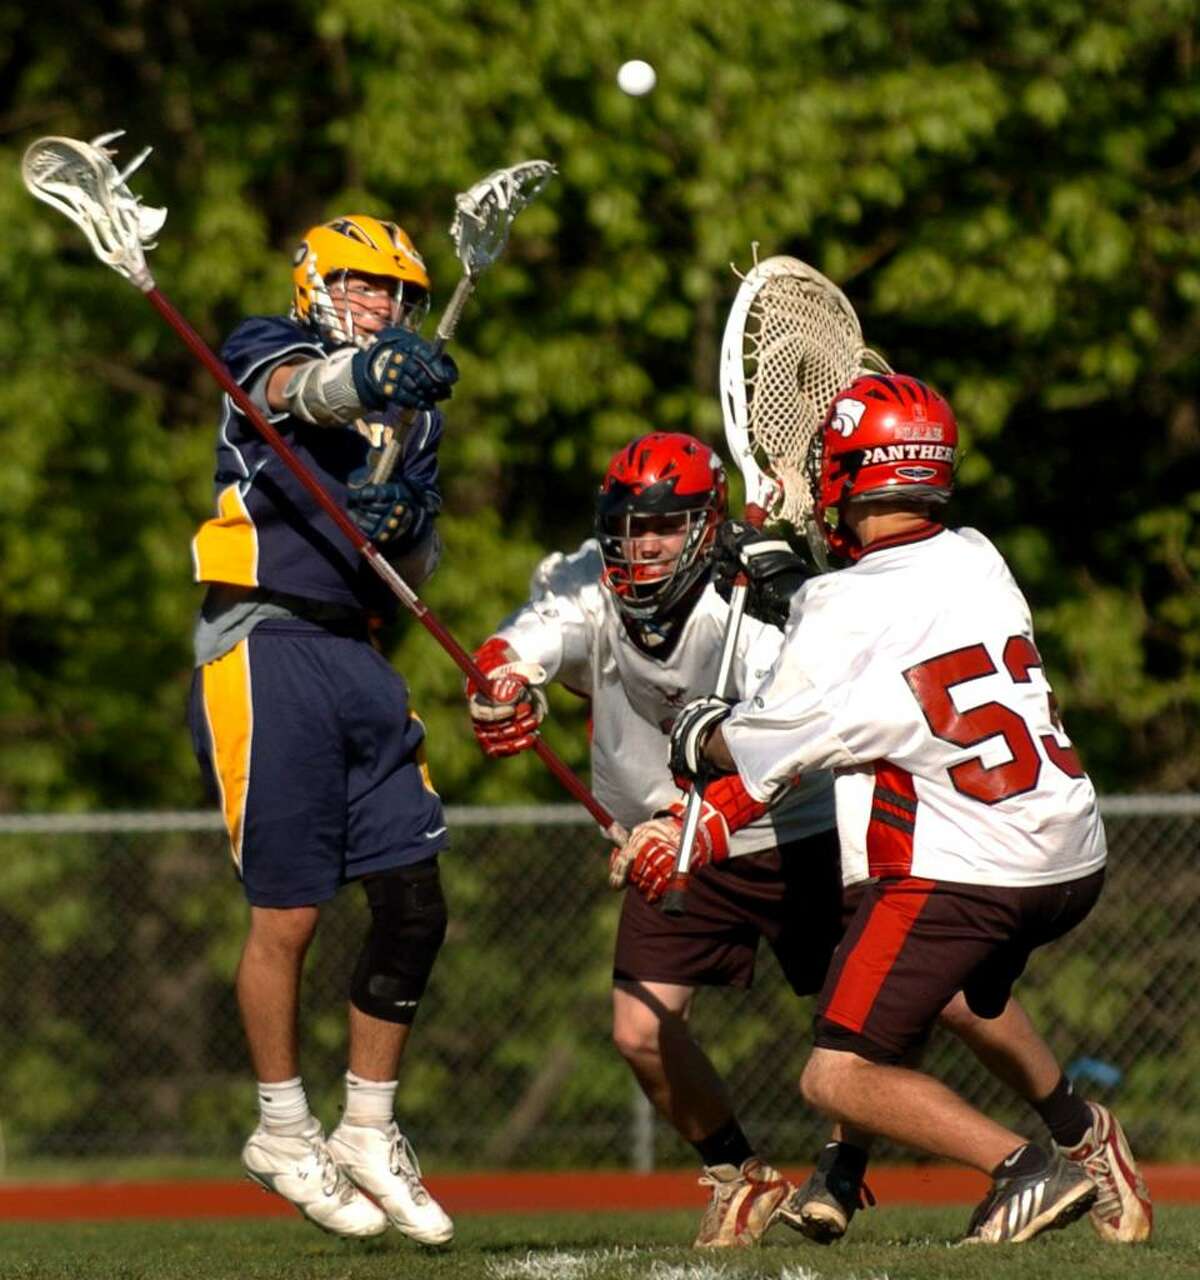 Weston's Jack Scheufele, left, send the ball past Masuk goalie Charles Porzelt for a goal, during lacrosse action in Monroe, Conn. on Friday May 07, 2010. Trying to block in the middle is Masuk's #3 Tim Treschitta.